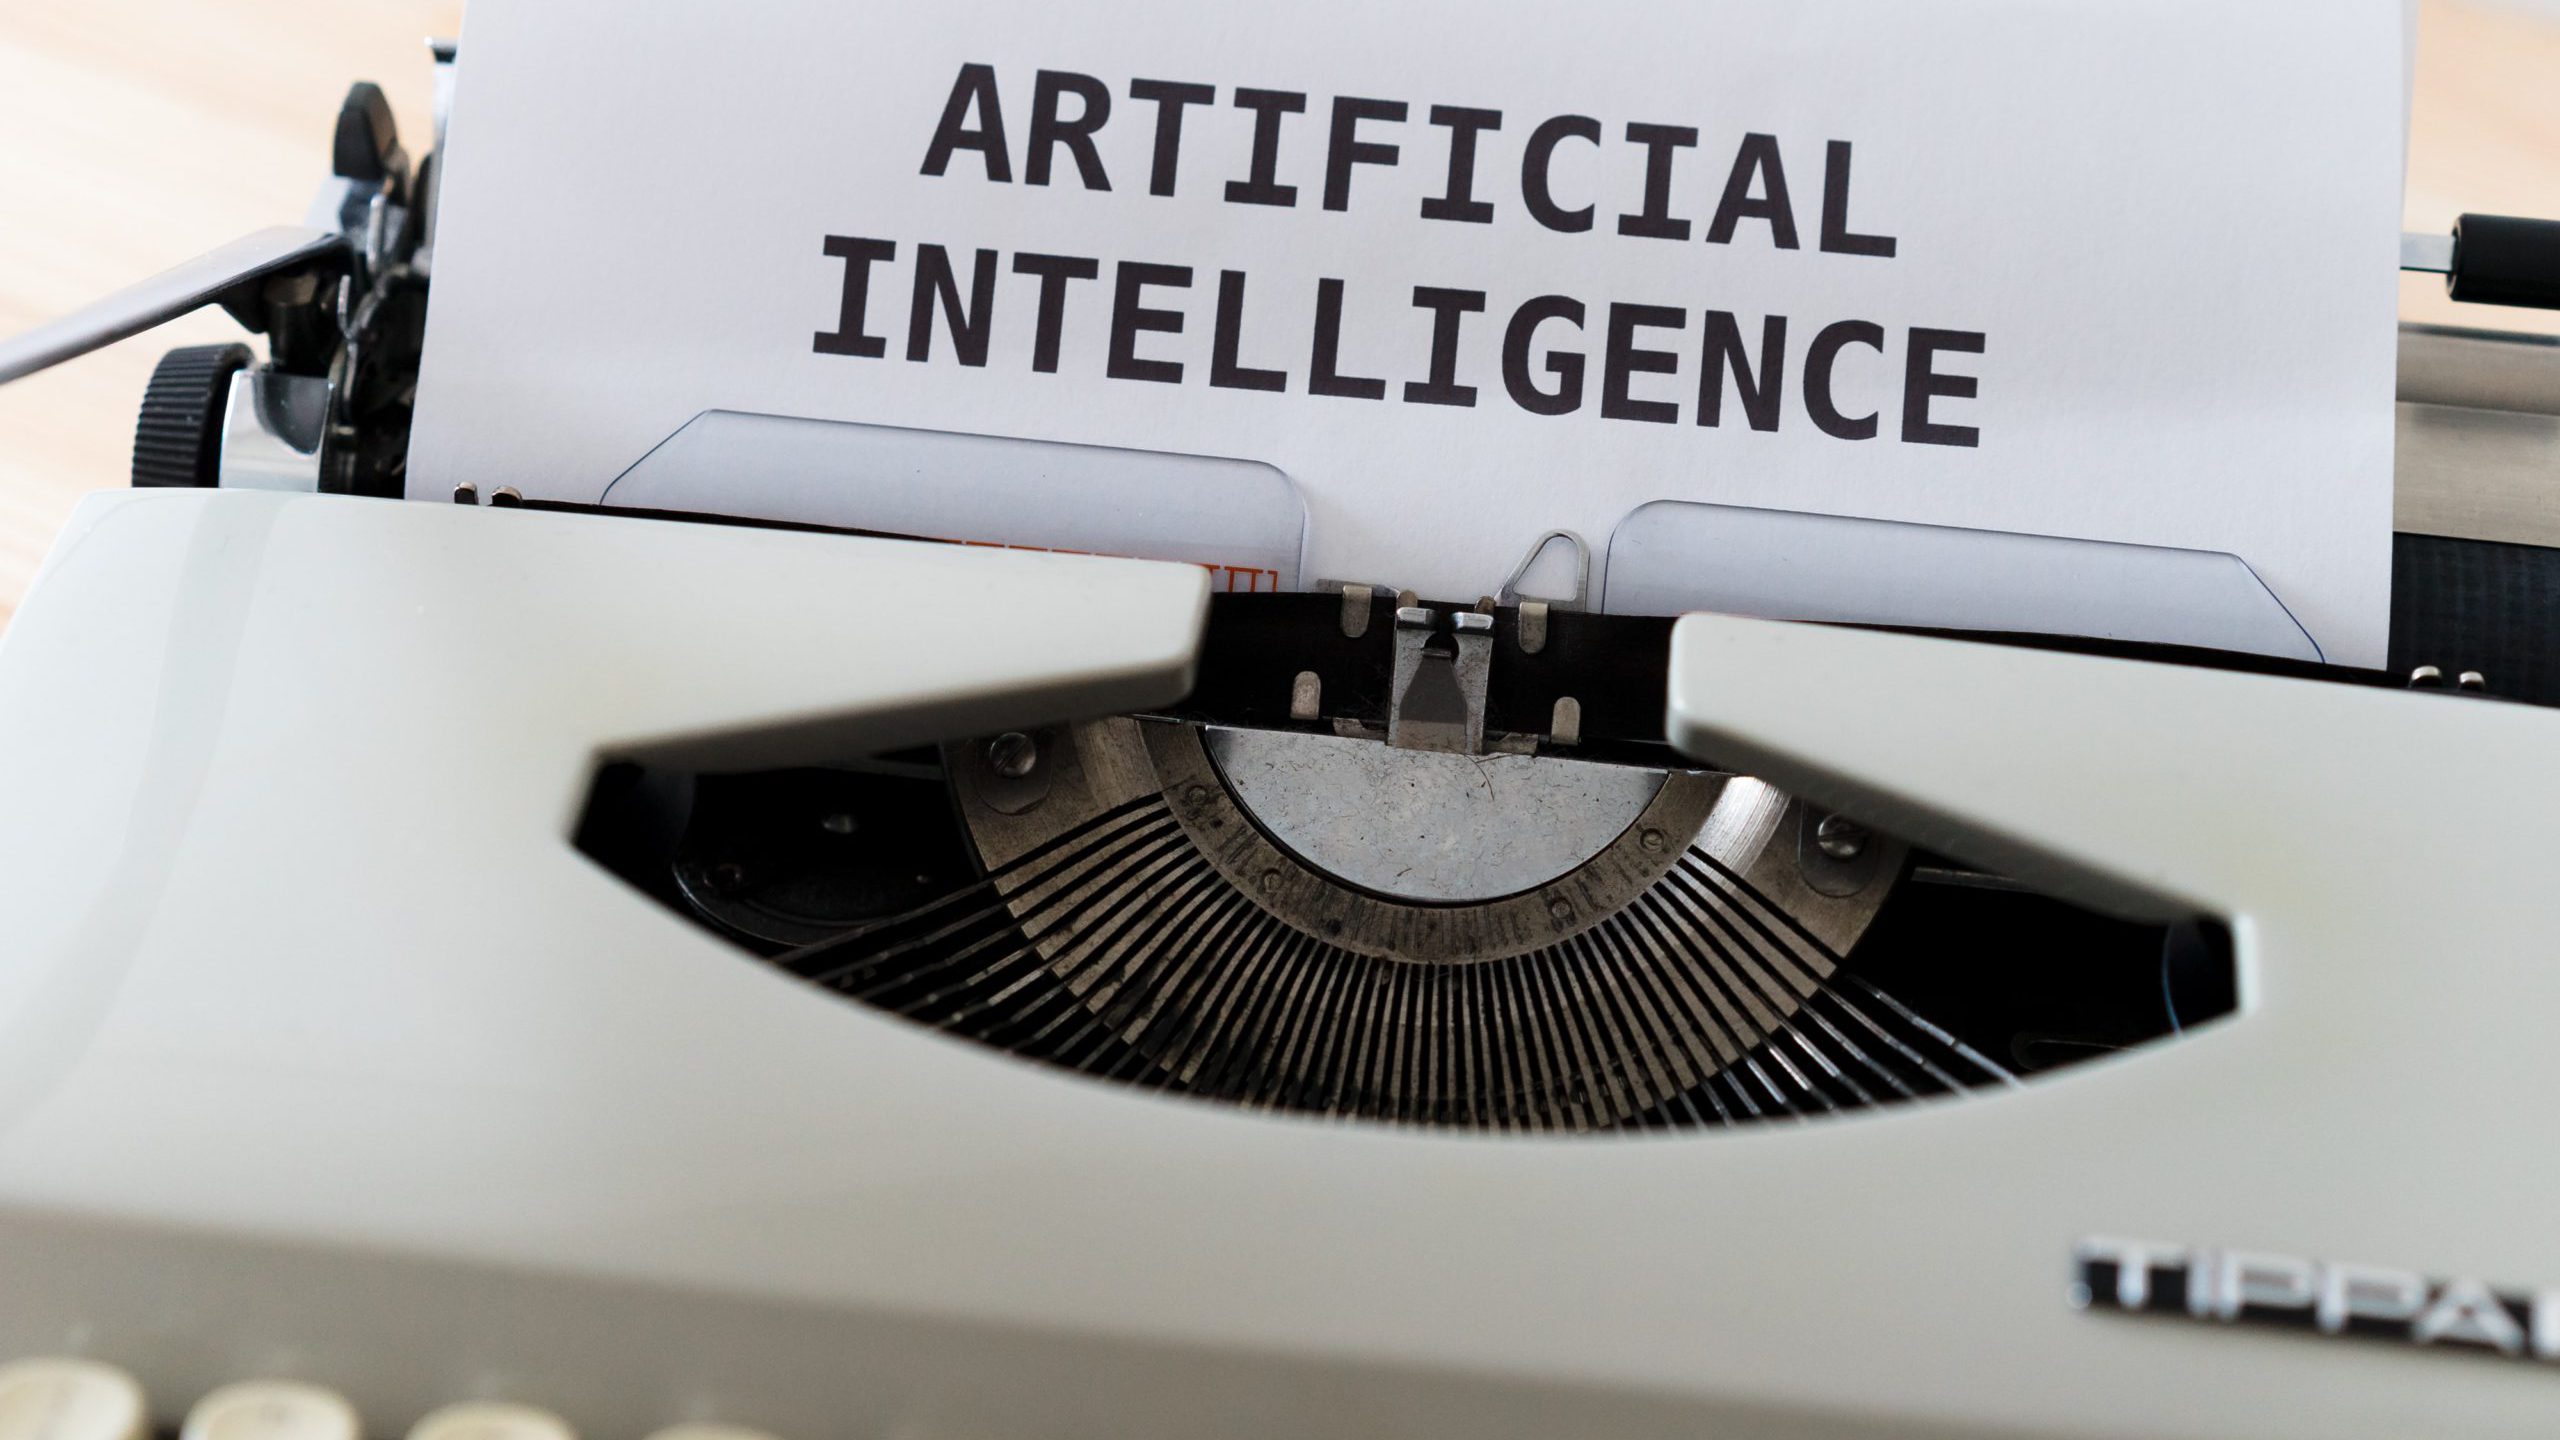 Parliamentary Responses to Artificial Intelligence